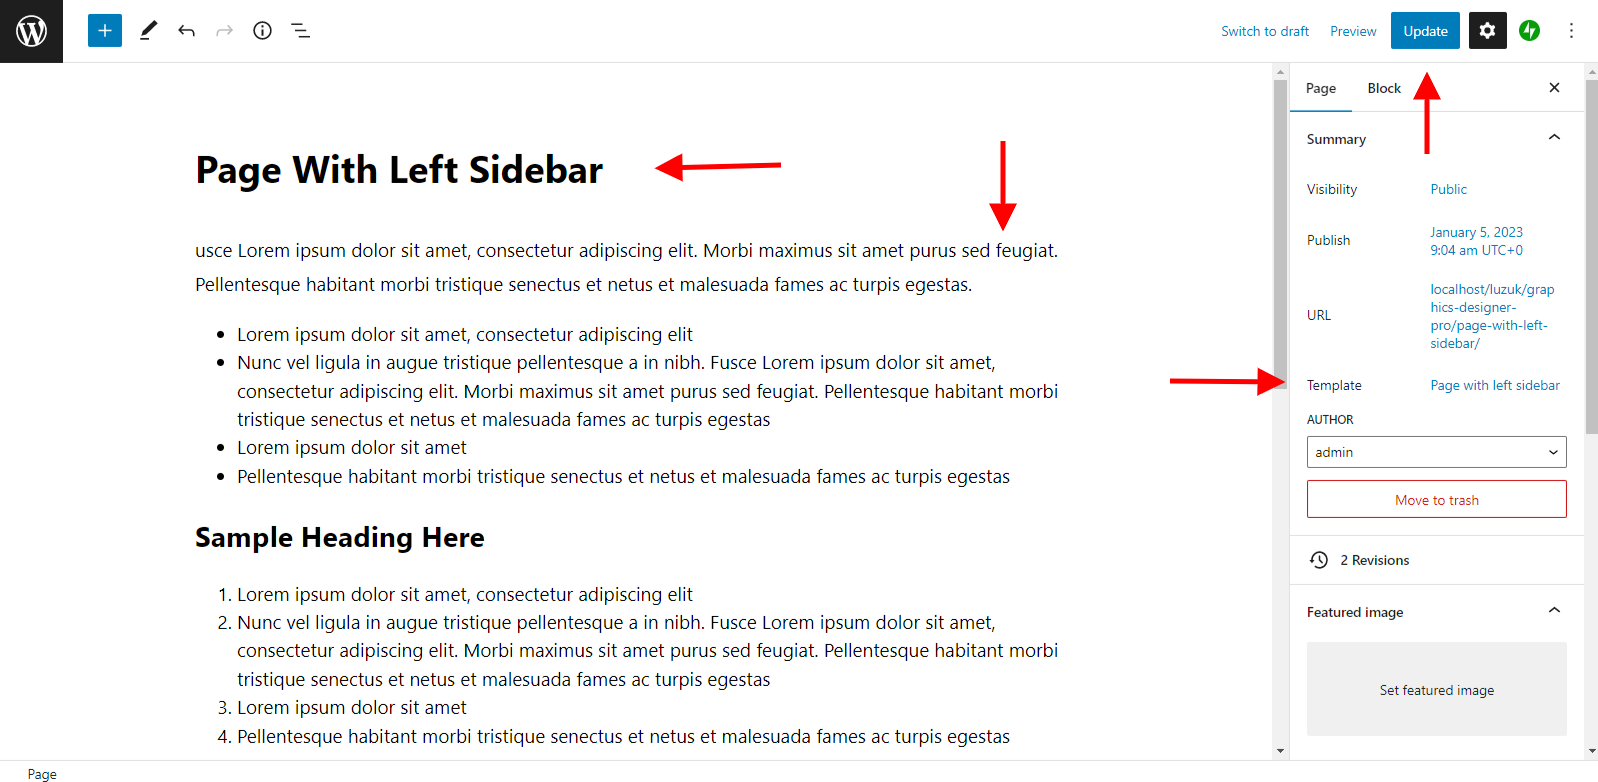 select Page With Left Sidebar template